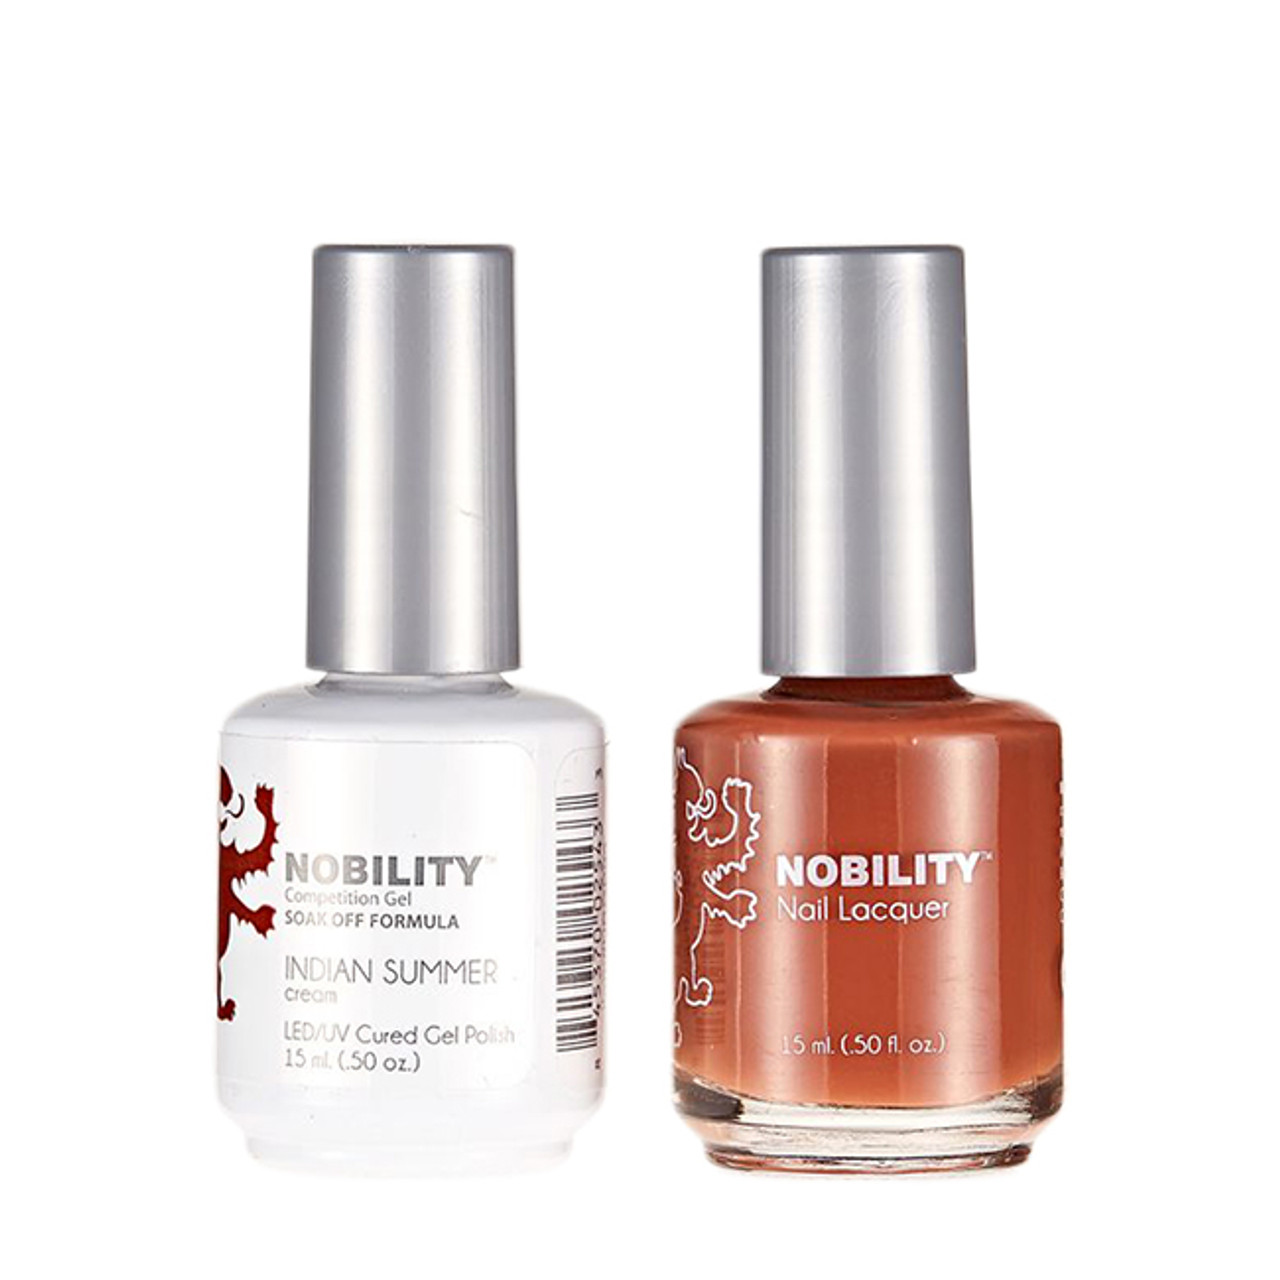 LeChat Nobility Gel Polish & Nail Lacquer Duo Set Indian Summer - .5 oz / 15 ml